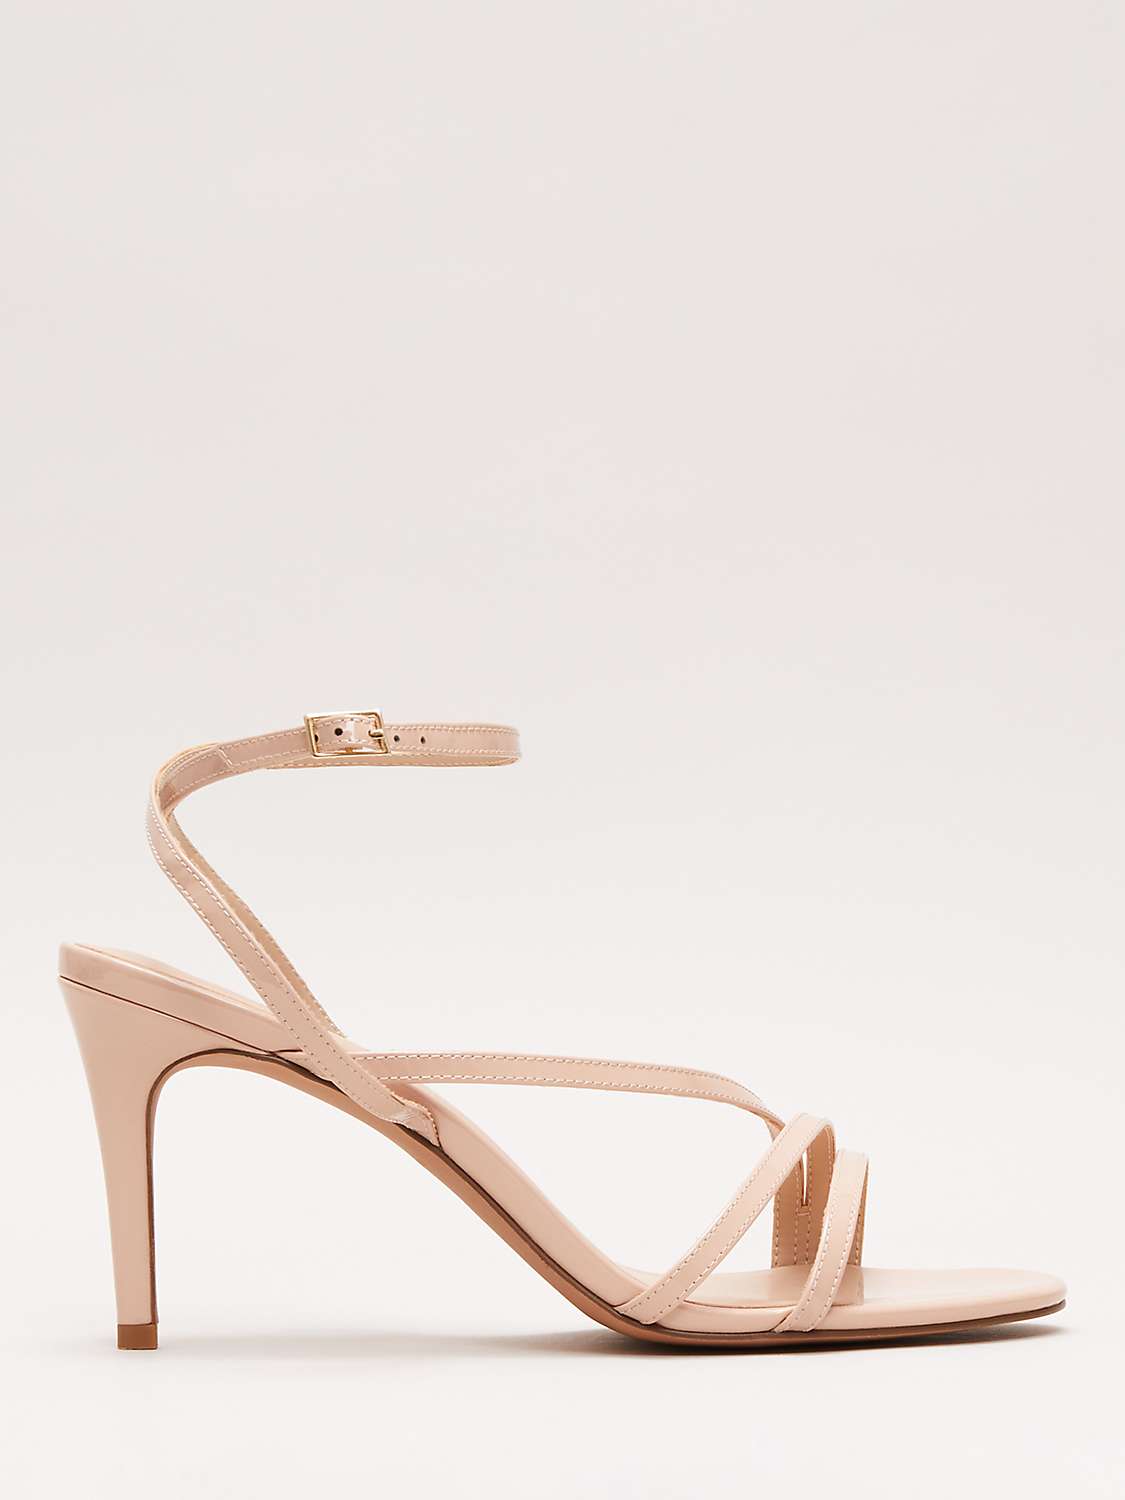 Buy Phase Eight Patent Leather Barely There Strappy Sandals, Pale Pink Online at johnlewis.com